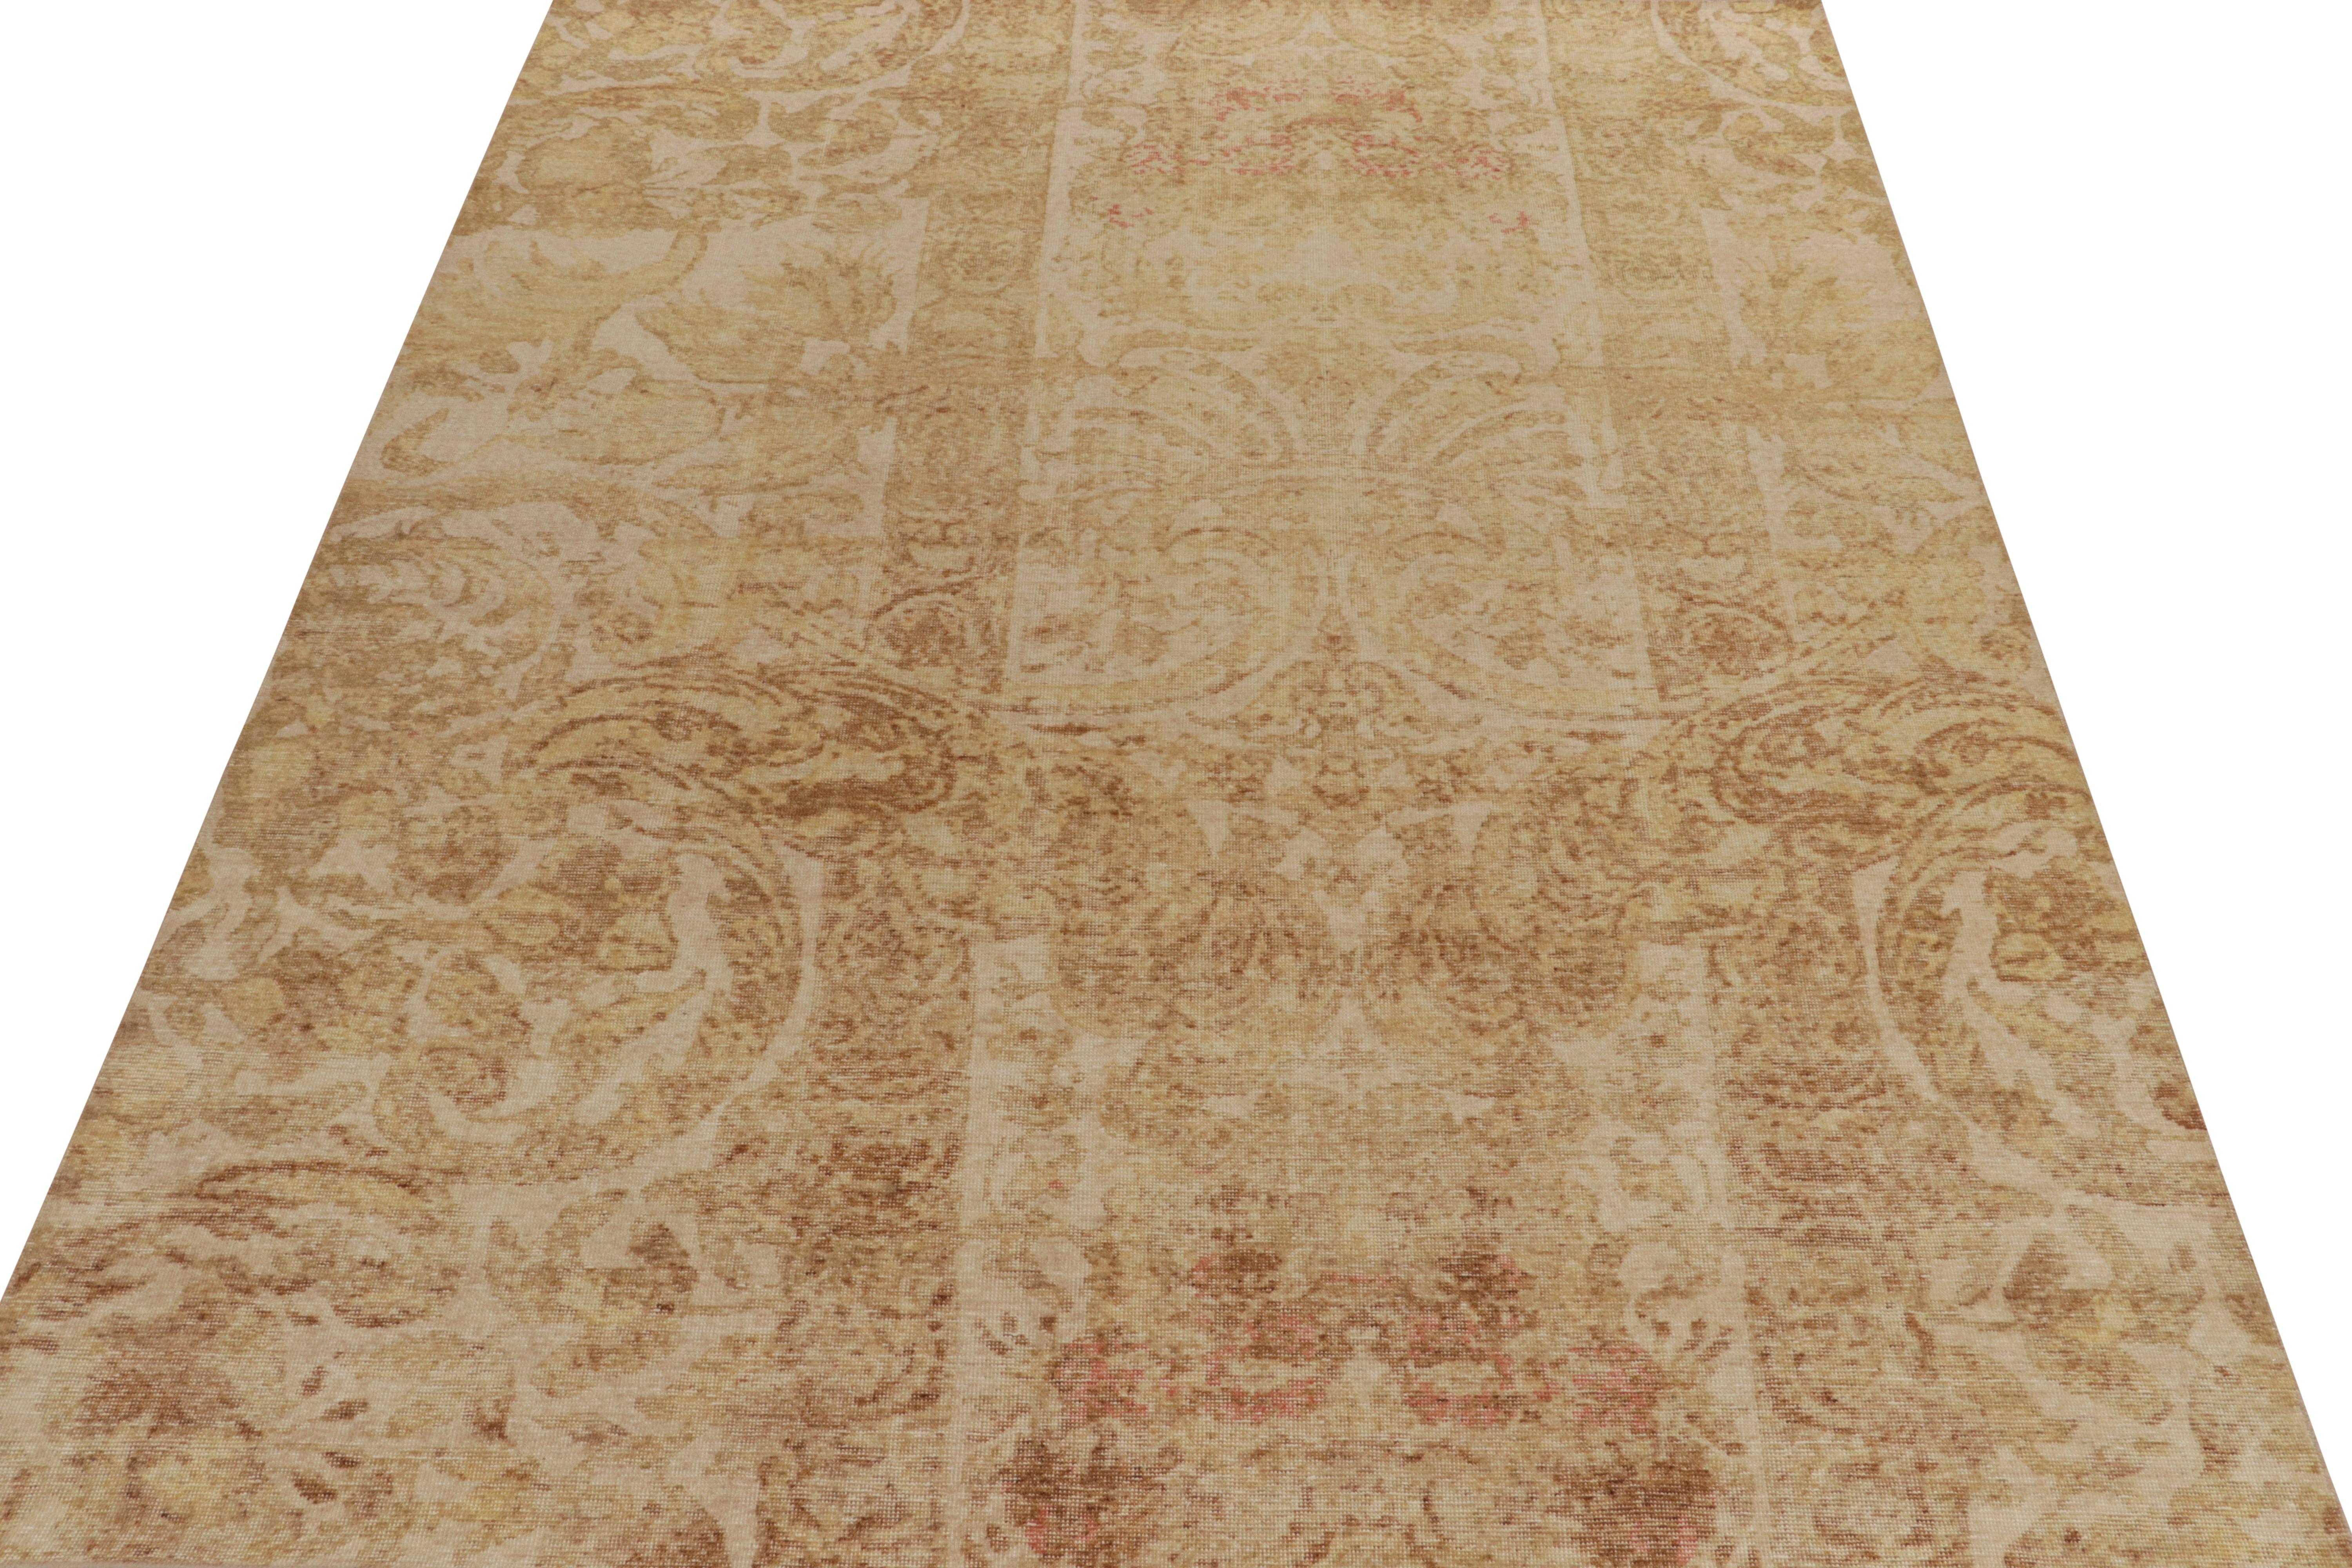 Indian Rug & Kilim’s Distressed European Style Rug in Beige-Brown & Gold Floral Pattern For Sale